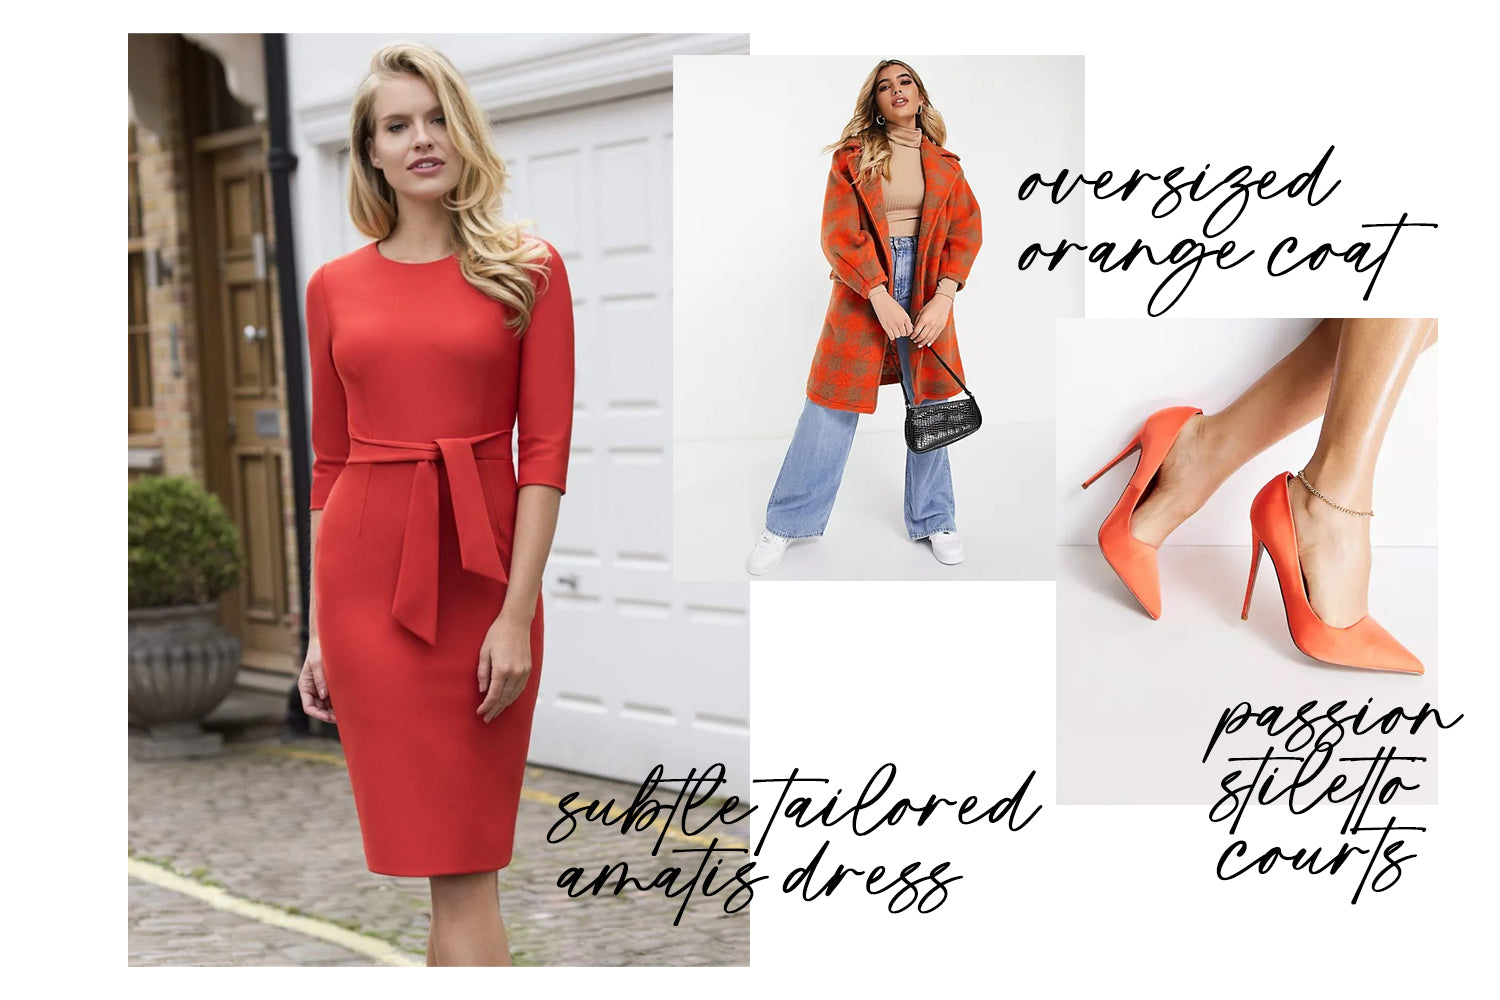 a range of images blended together to show the Amatis Pencil dress, a pair of stiletto shoes and an oversized orange coat - all with text stating each item.